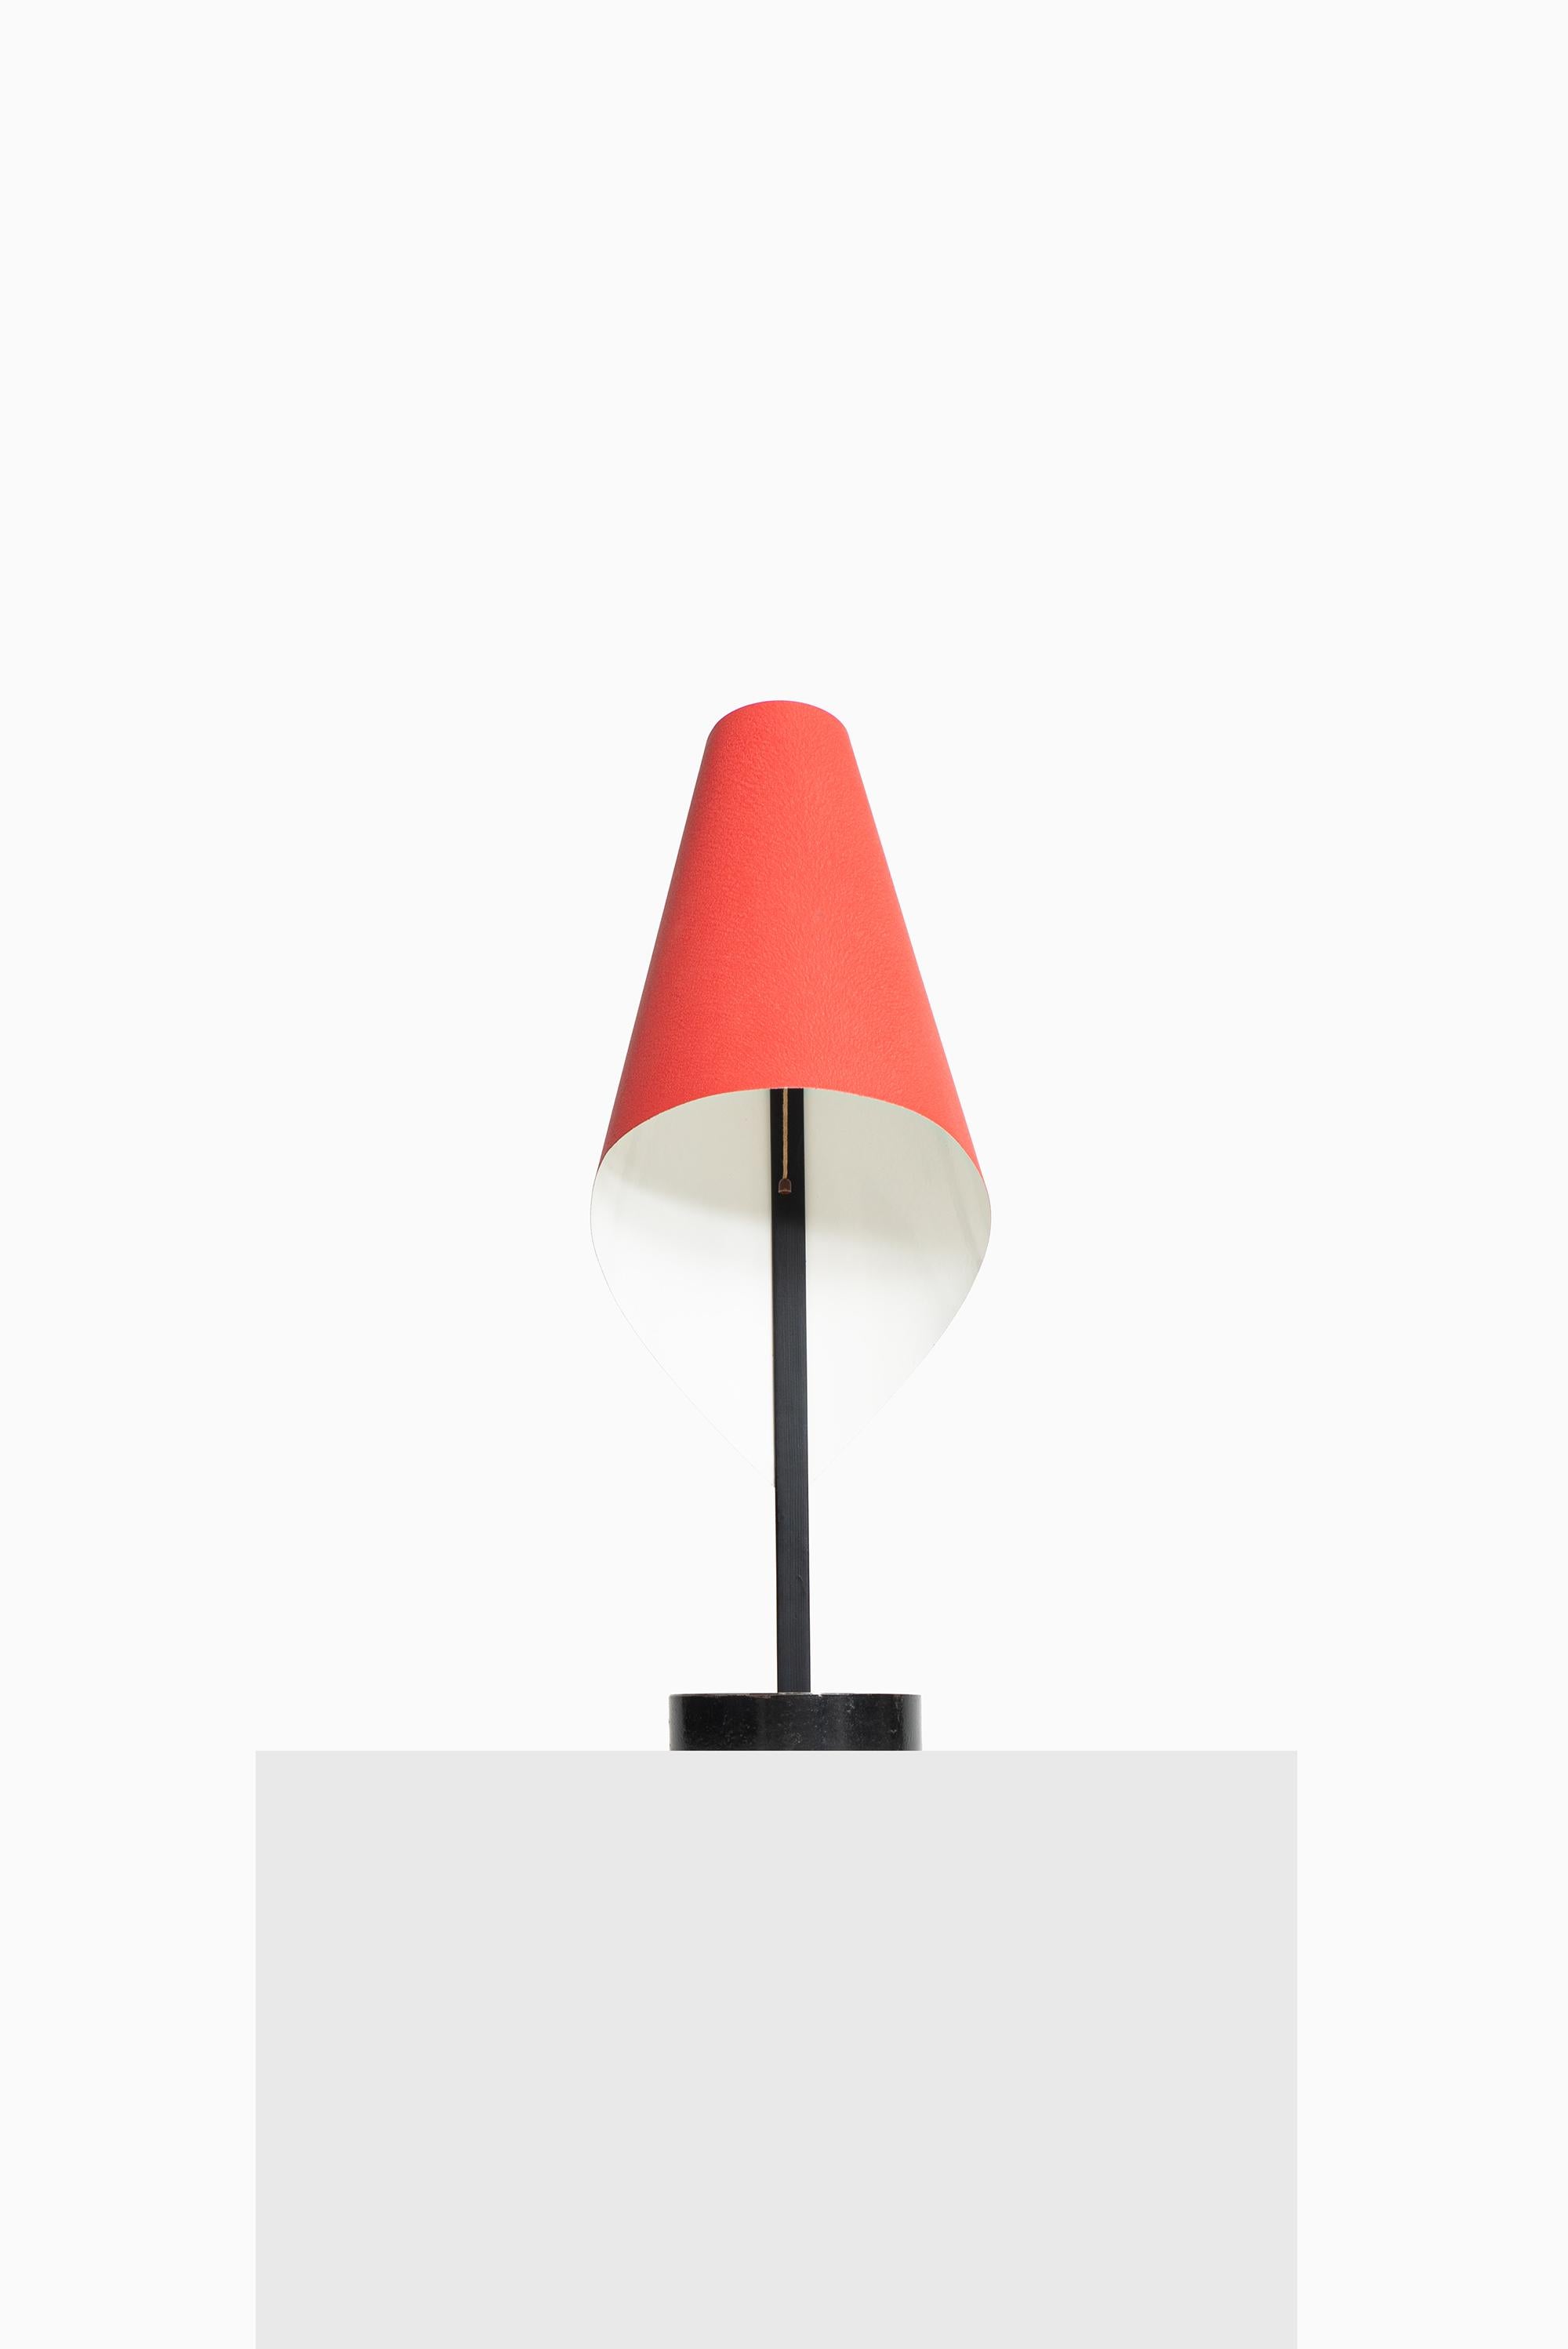 Midcentury table lamp by unknown designer. Produced in Sweden.